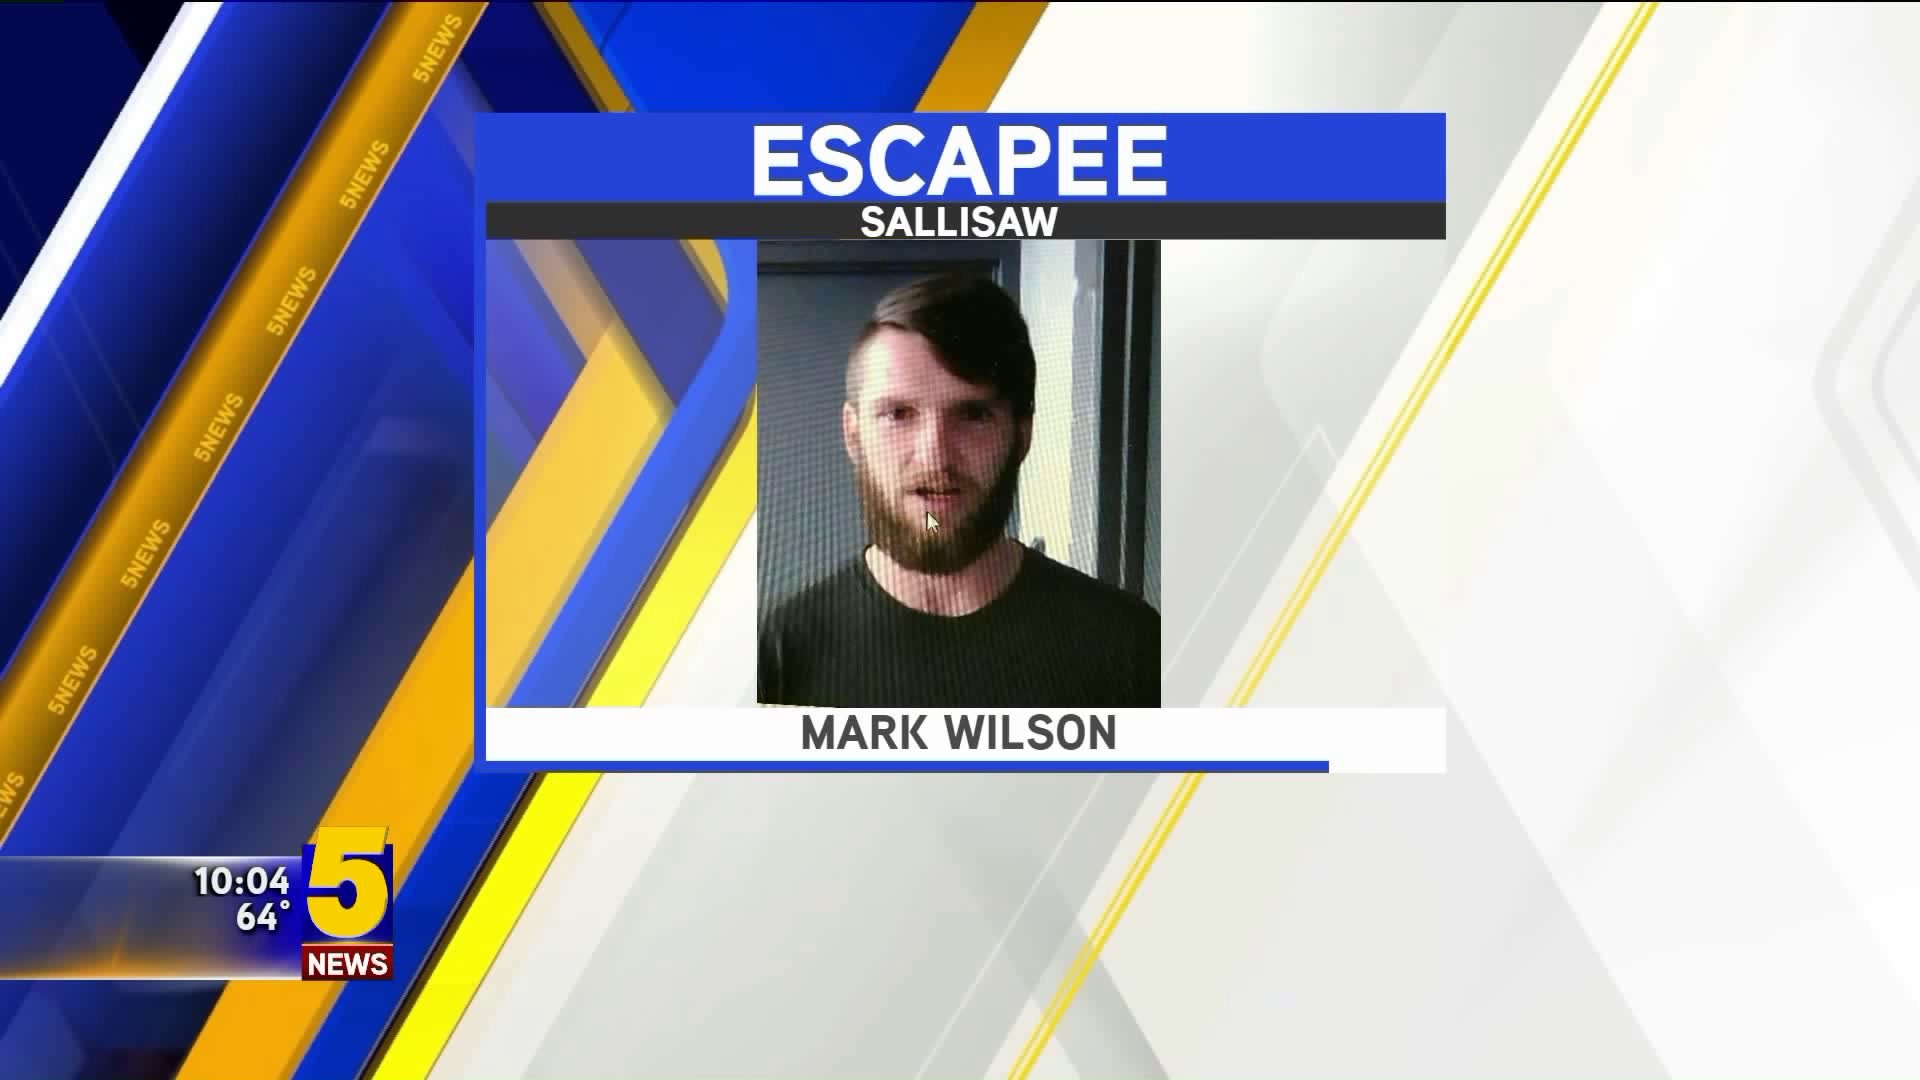 Sallisaw PD Searching For Escapee